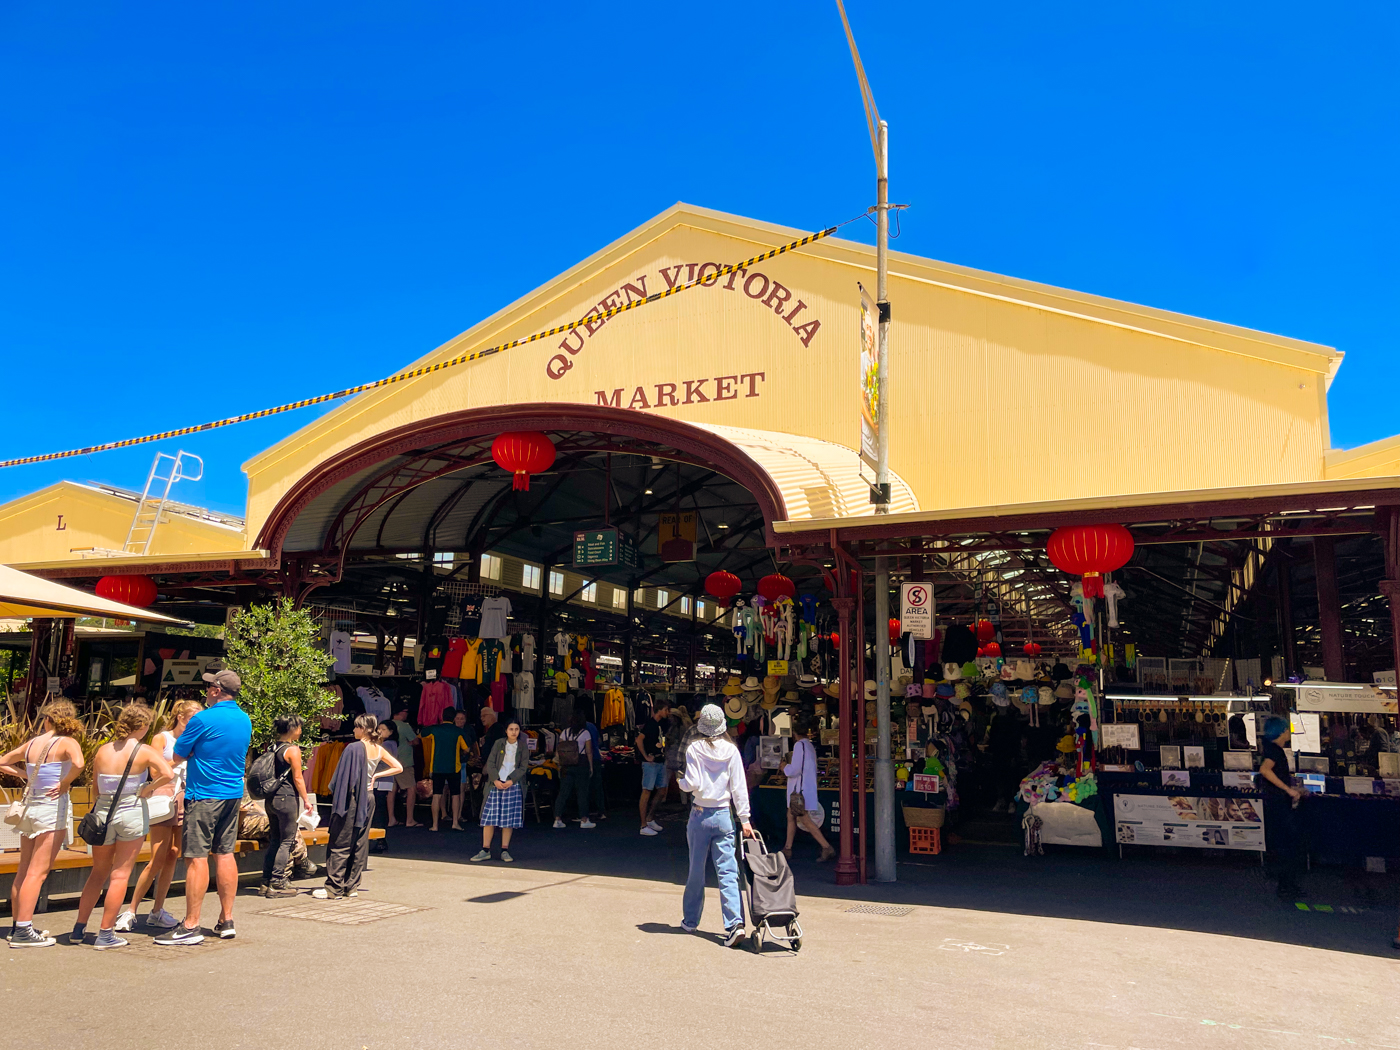 A quiet entrance to the Queen Victoria Market on a sunny, cloudless day. The faded yellow facade has the name of the market on it, while the shaded interior shows souvenir stalls for tourists to browse.